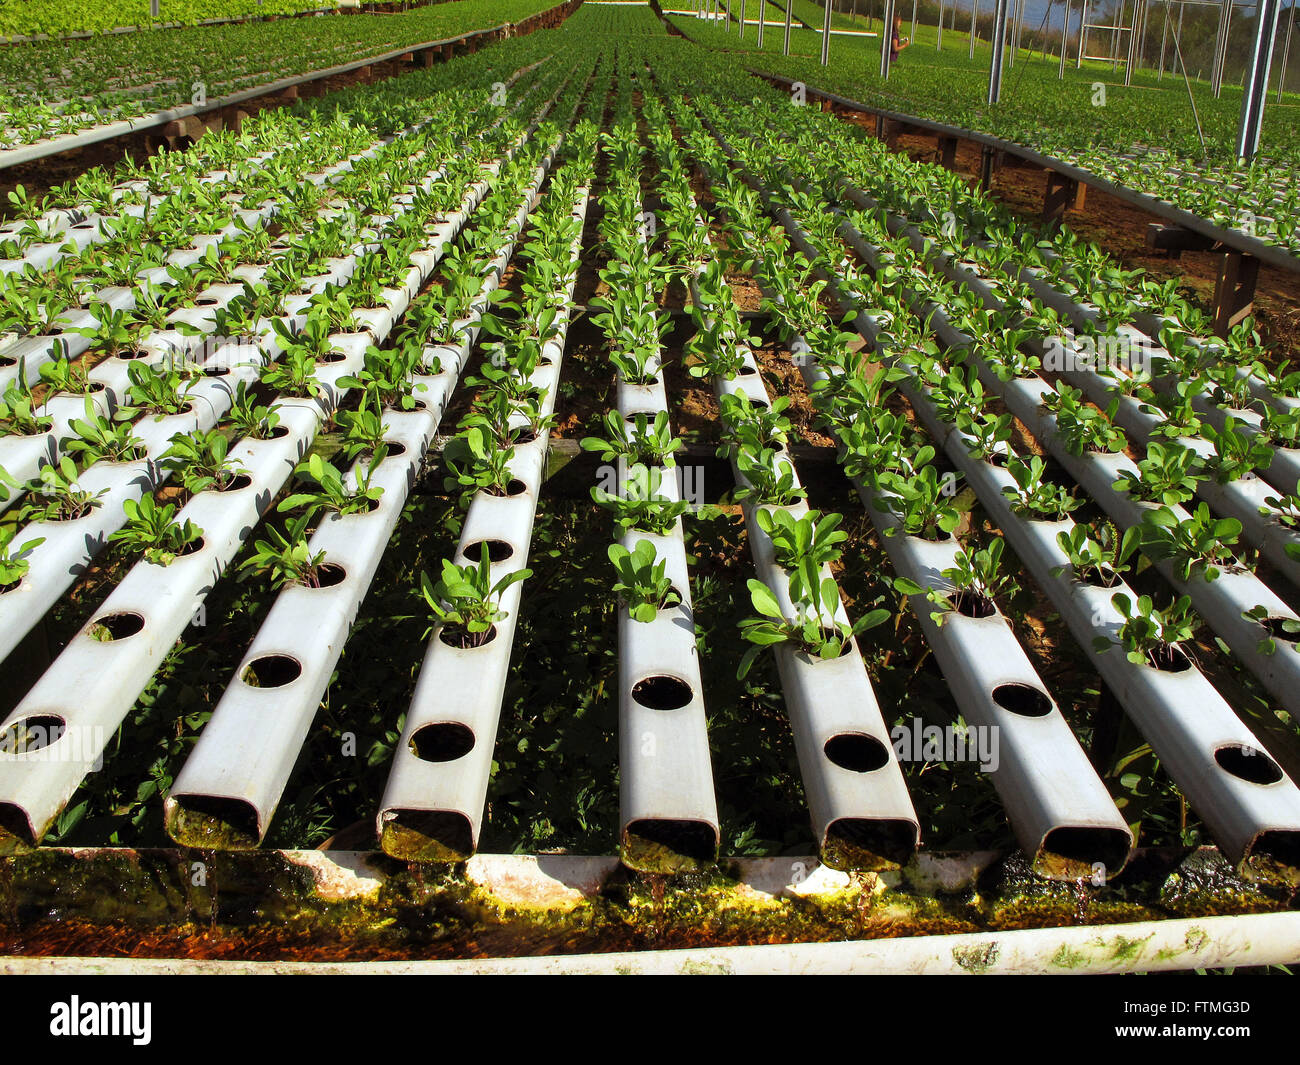 Cultivation of vegetables in hydroponic technique - rural town of Cotia - SP Stock Photo